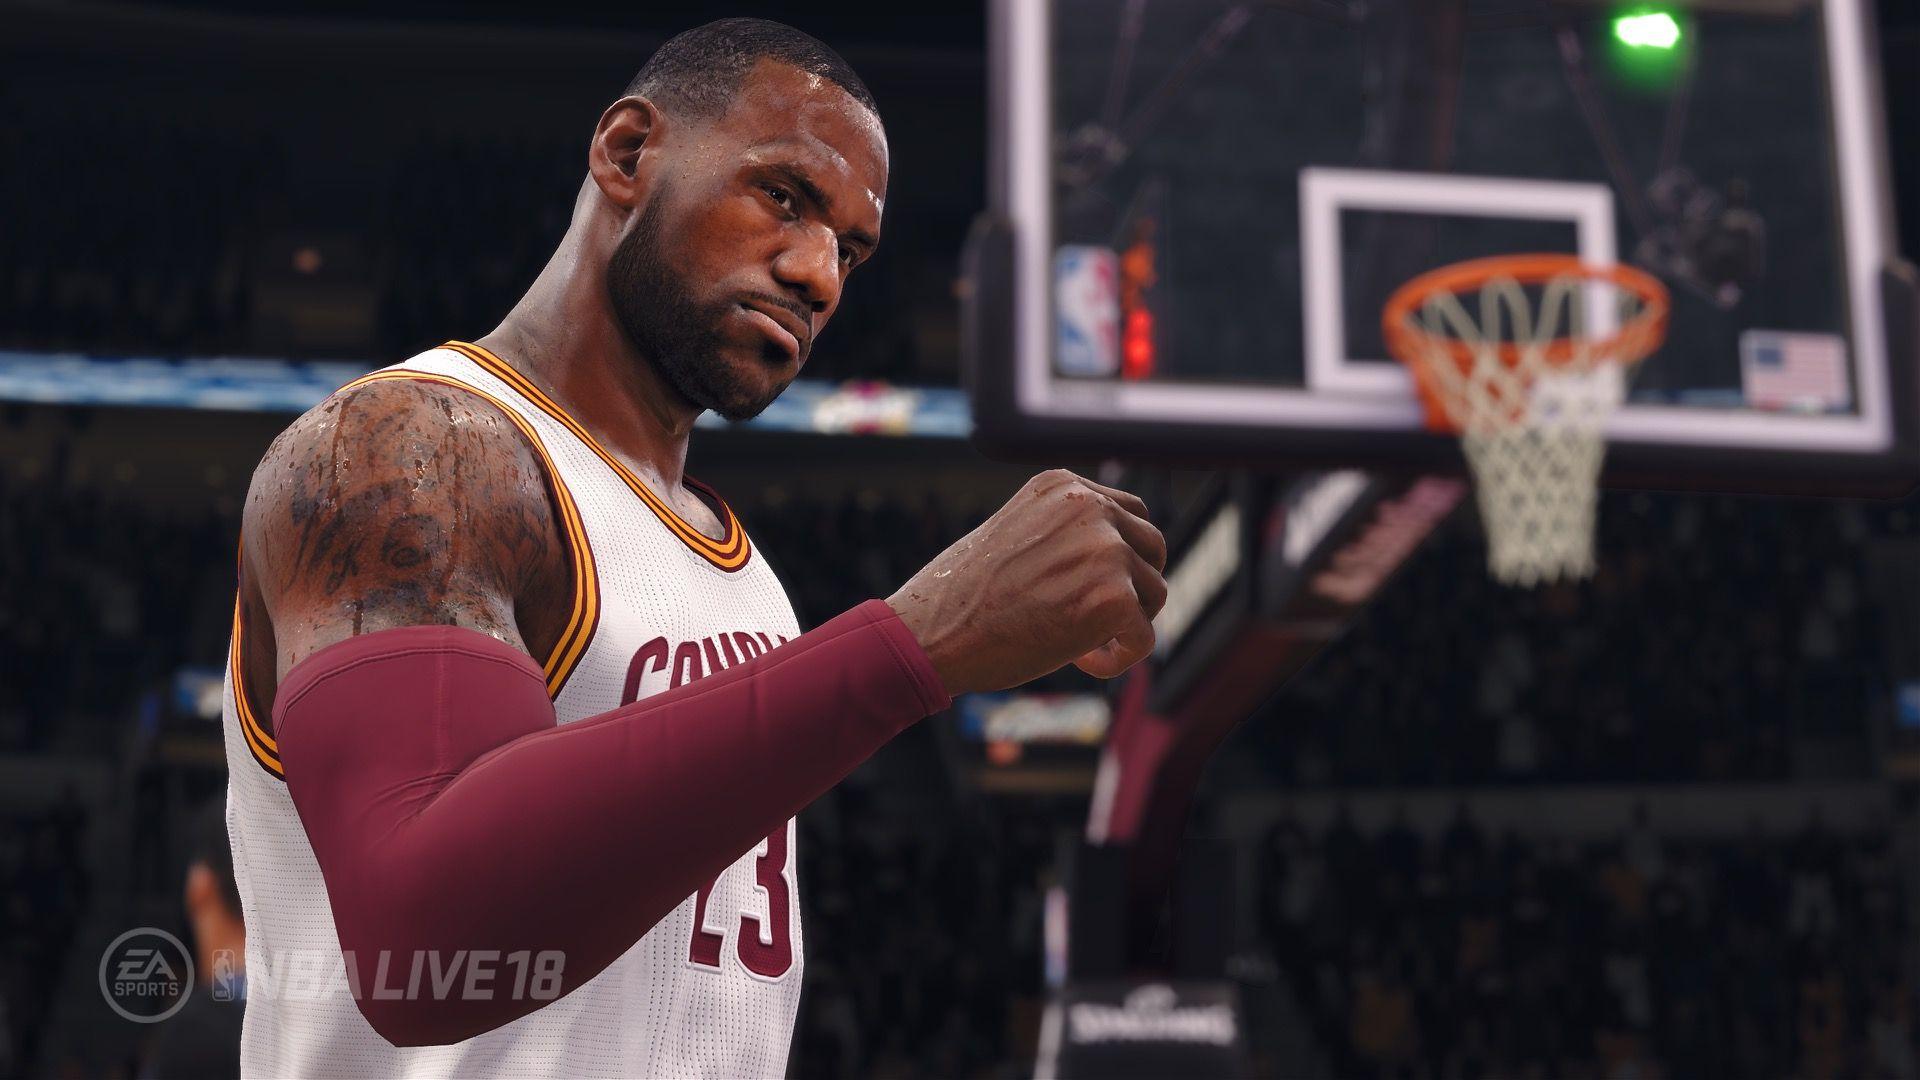 Amazing NBA 2K18 Game Picture. Beautiful image HD Picture